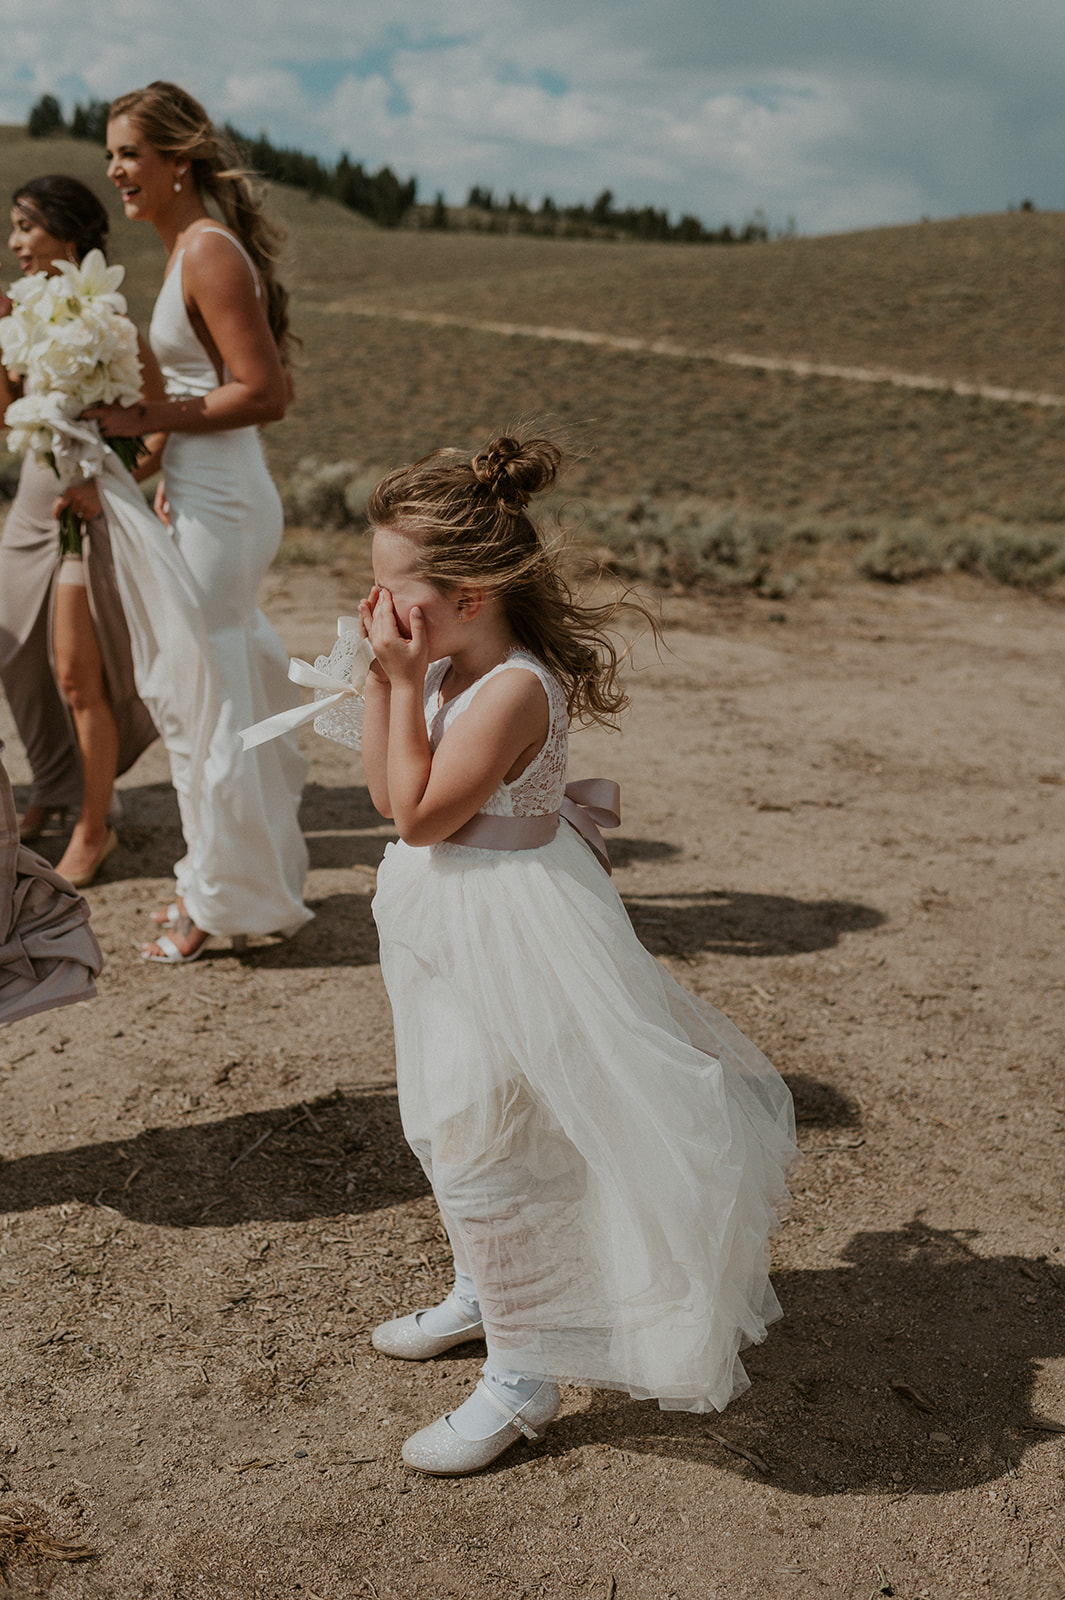 Candid moment of flower girl in the Sawtooths